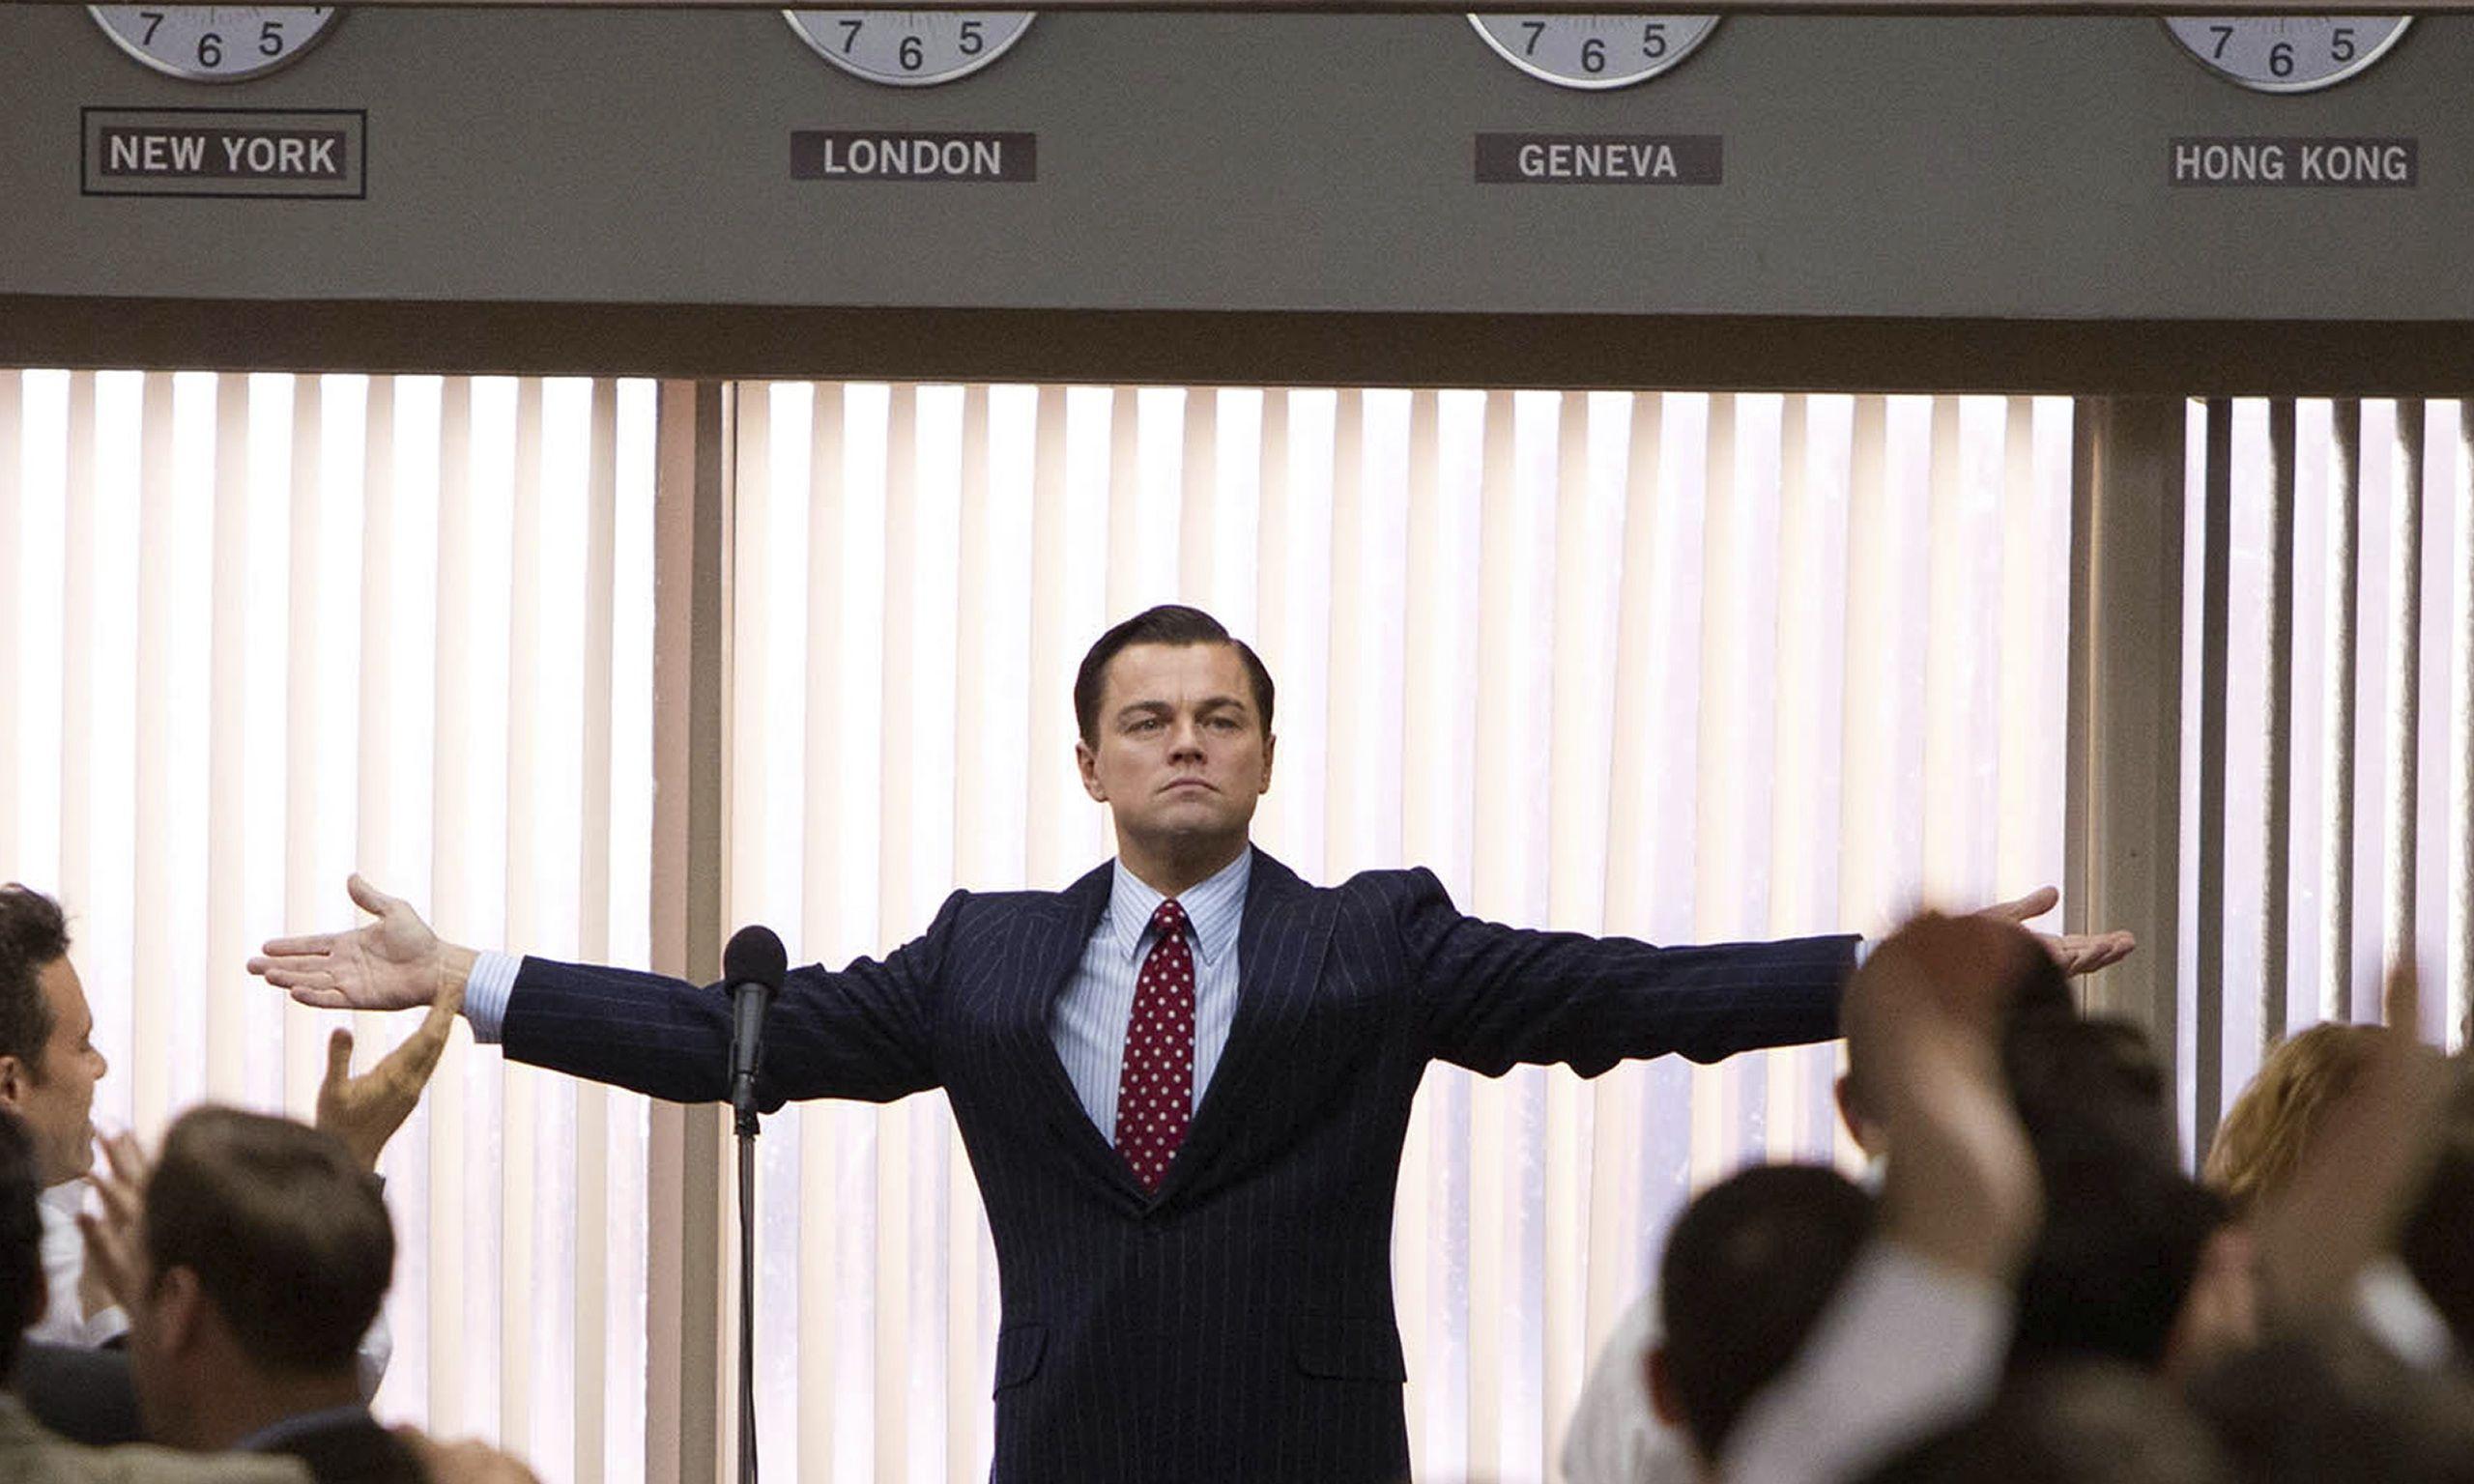 2560x1536px The Wolf Of Wall Street 652.24 KB